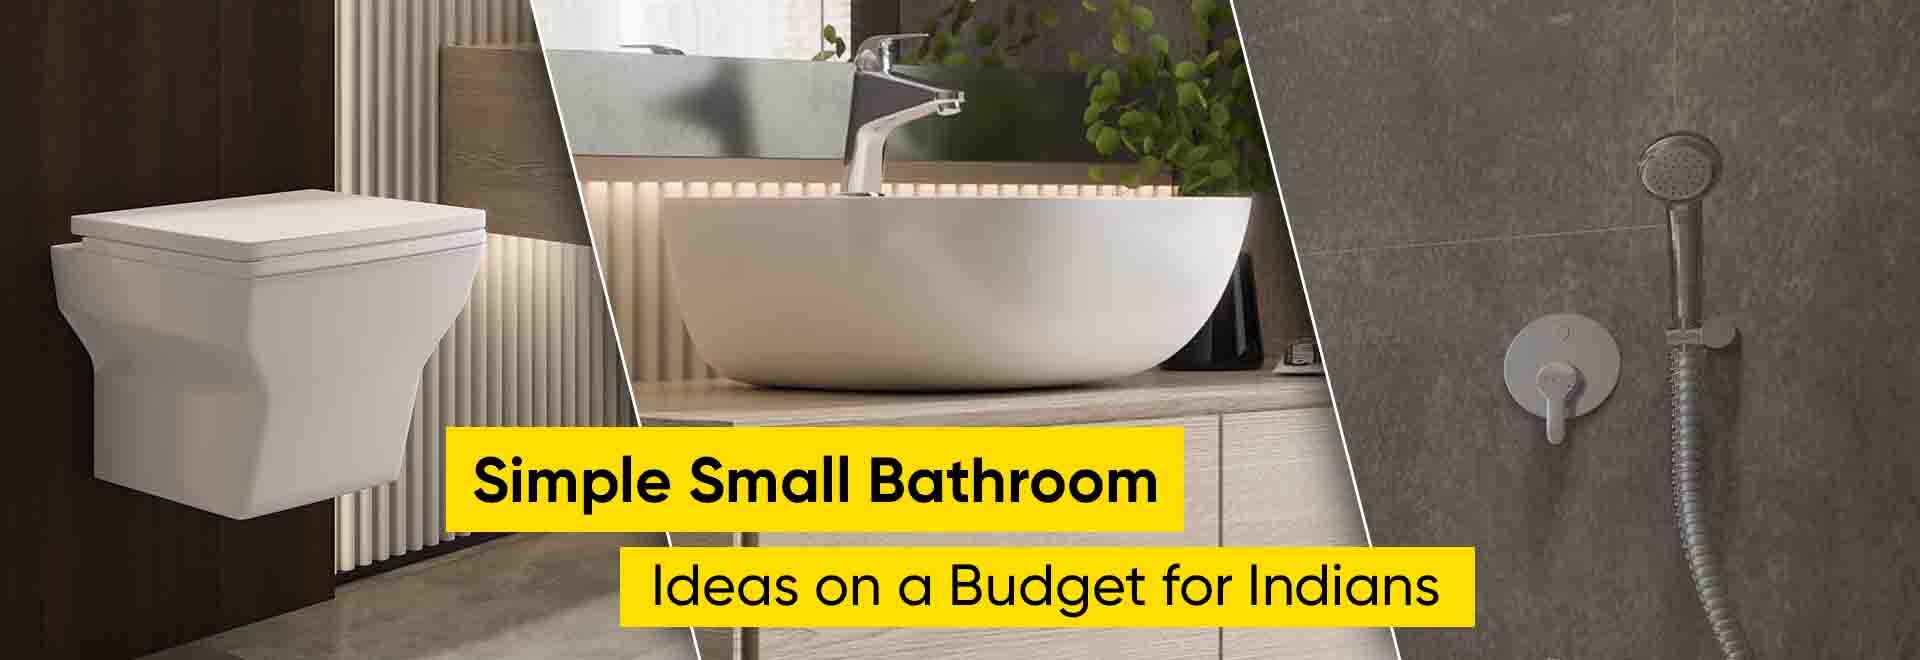 Simple Small Bathroom Ideas on a Budget for Indians